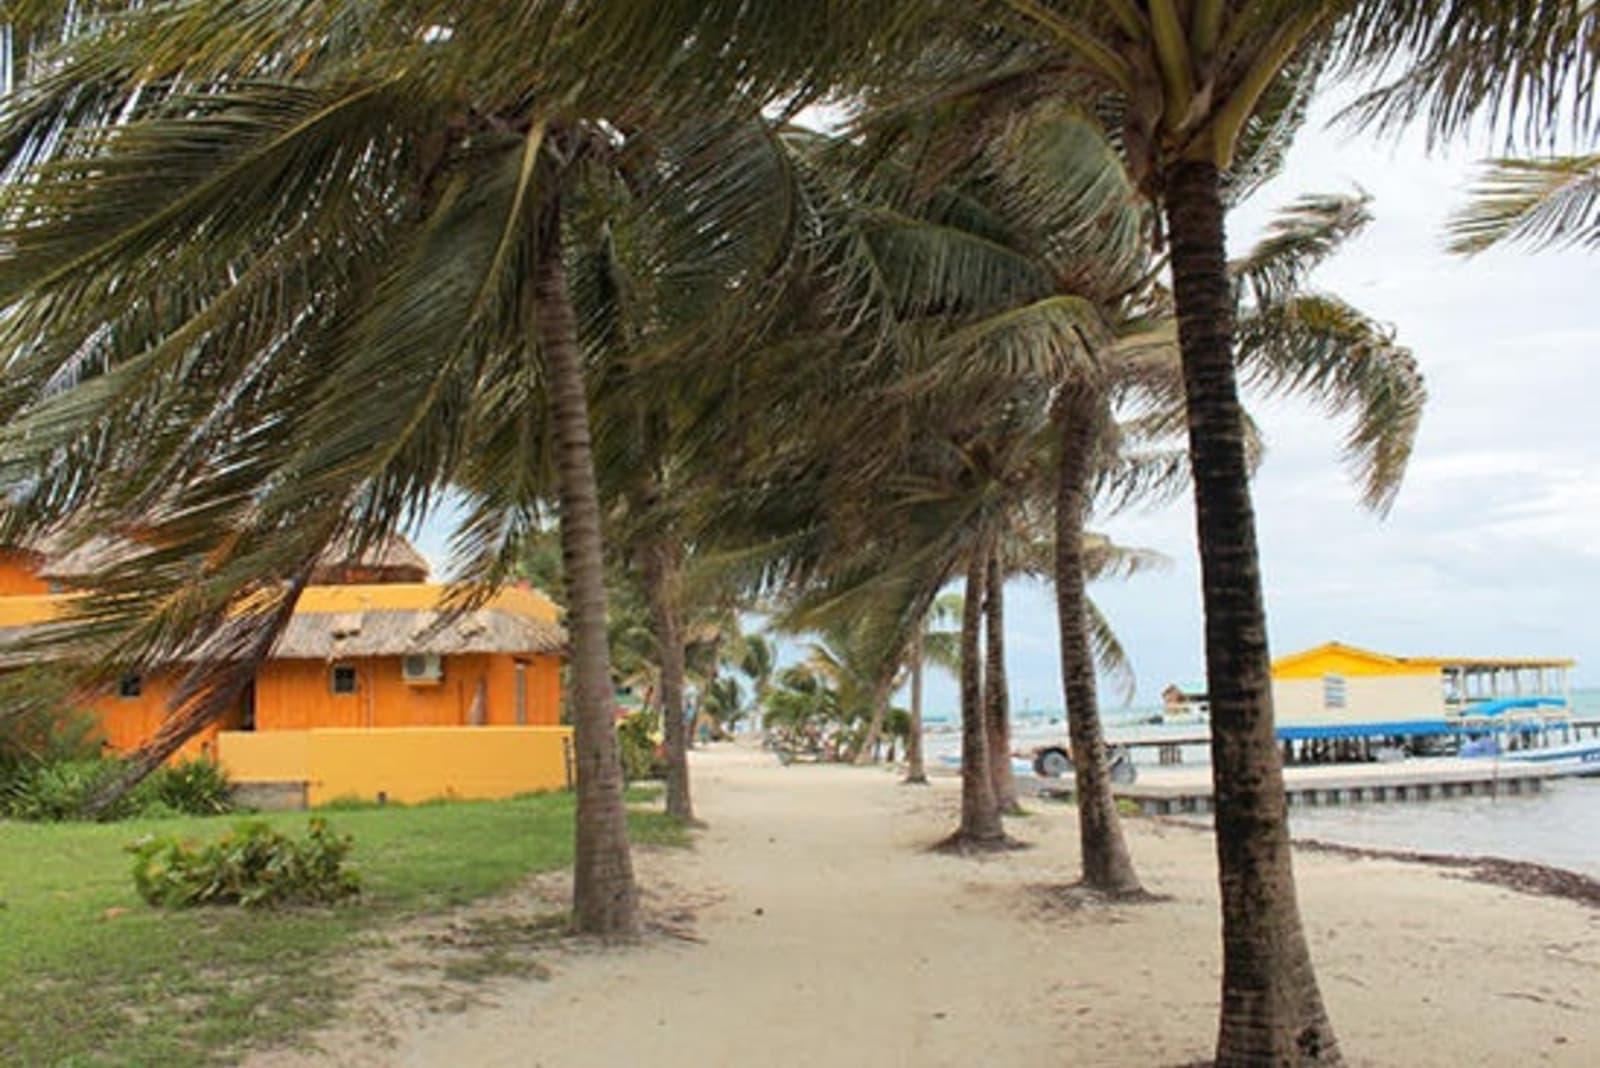 Palm trees blowing in the breeze in Caye Caulker, Belize.